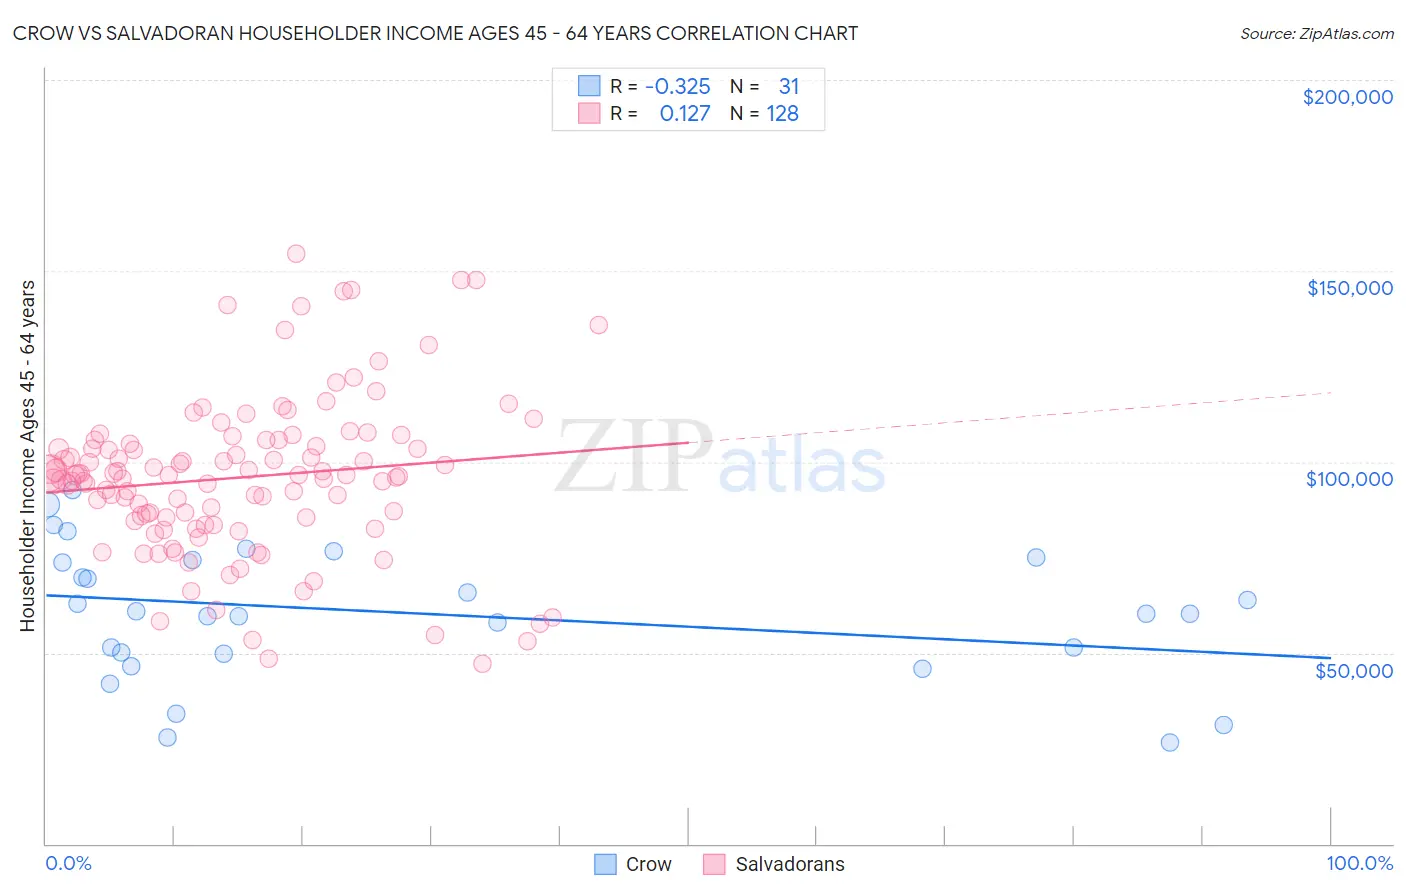 Crow vs Salvadoran Householder Income Ages 45 - 64 years